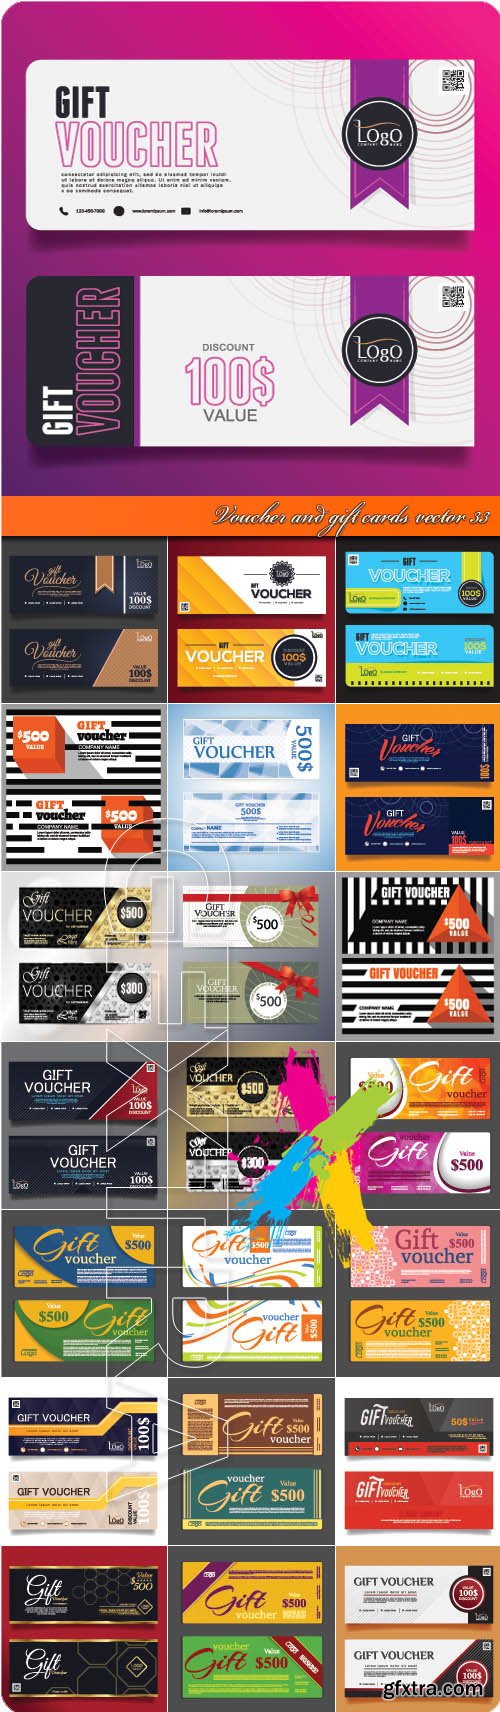 Voucher and gift cards vector 33